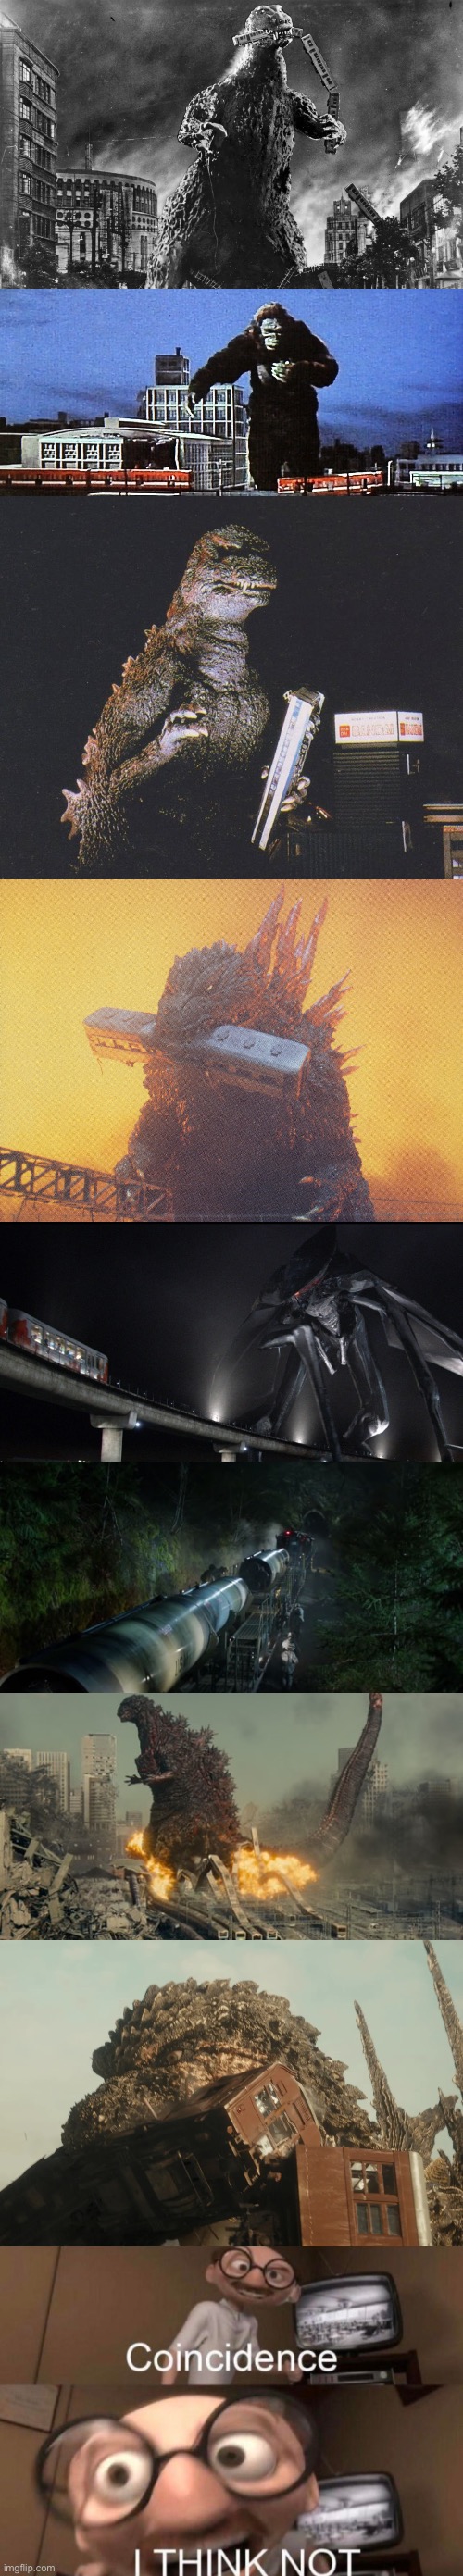 image tagged in godzilla,2014,train,trains,coincidence i think not | made w/ Imgflip meme maker